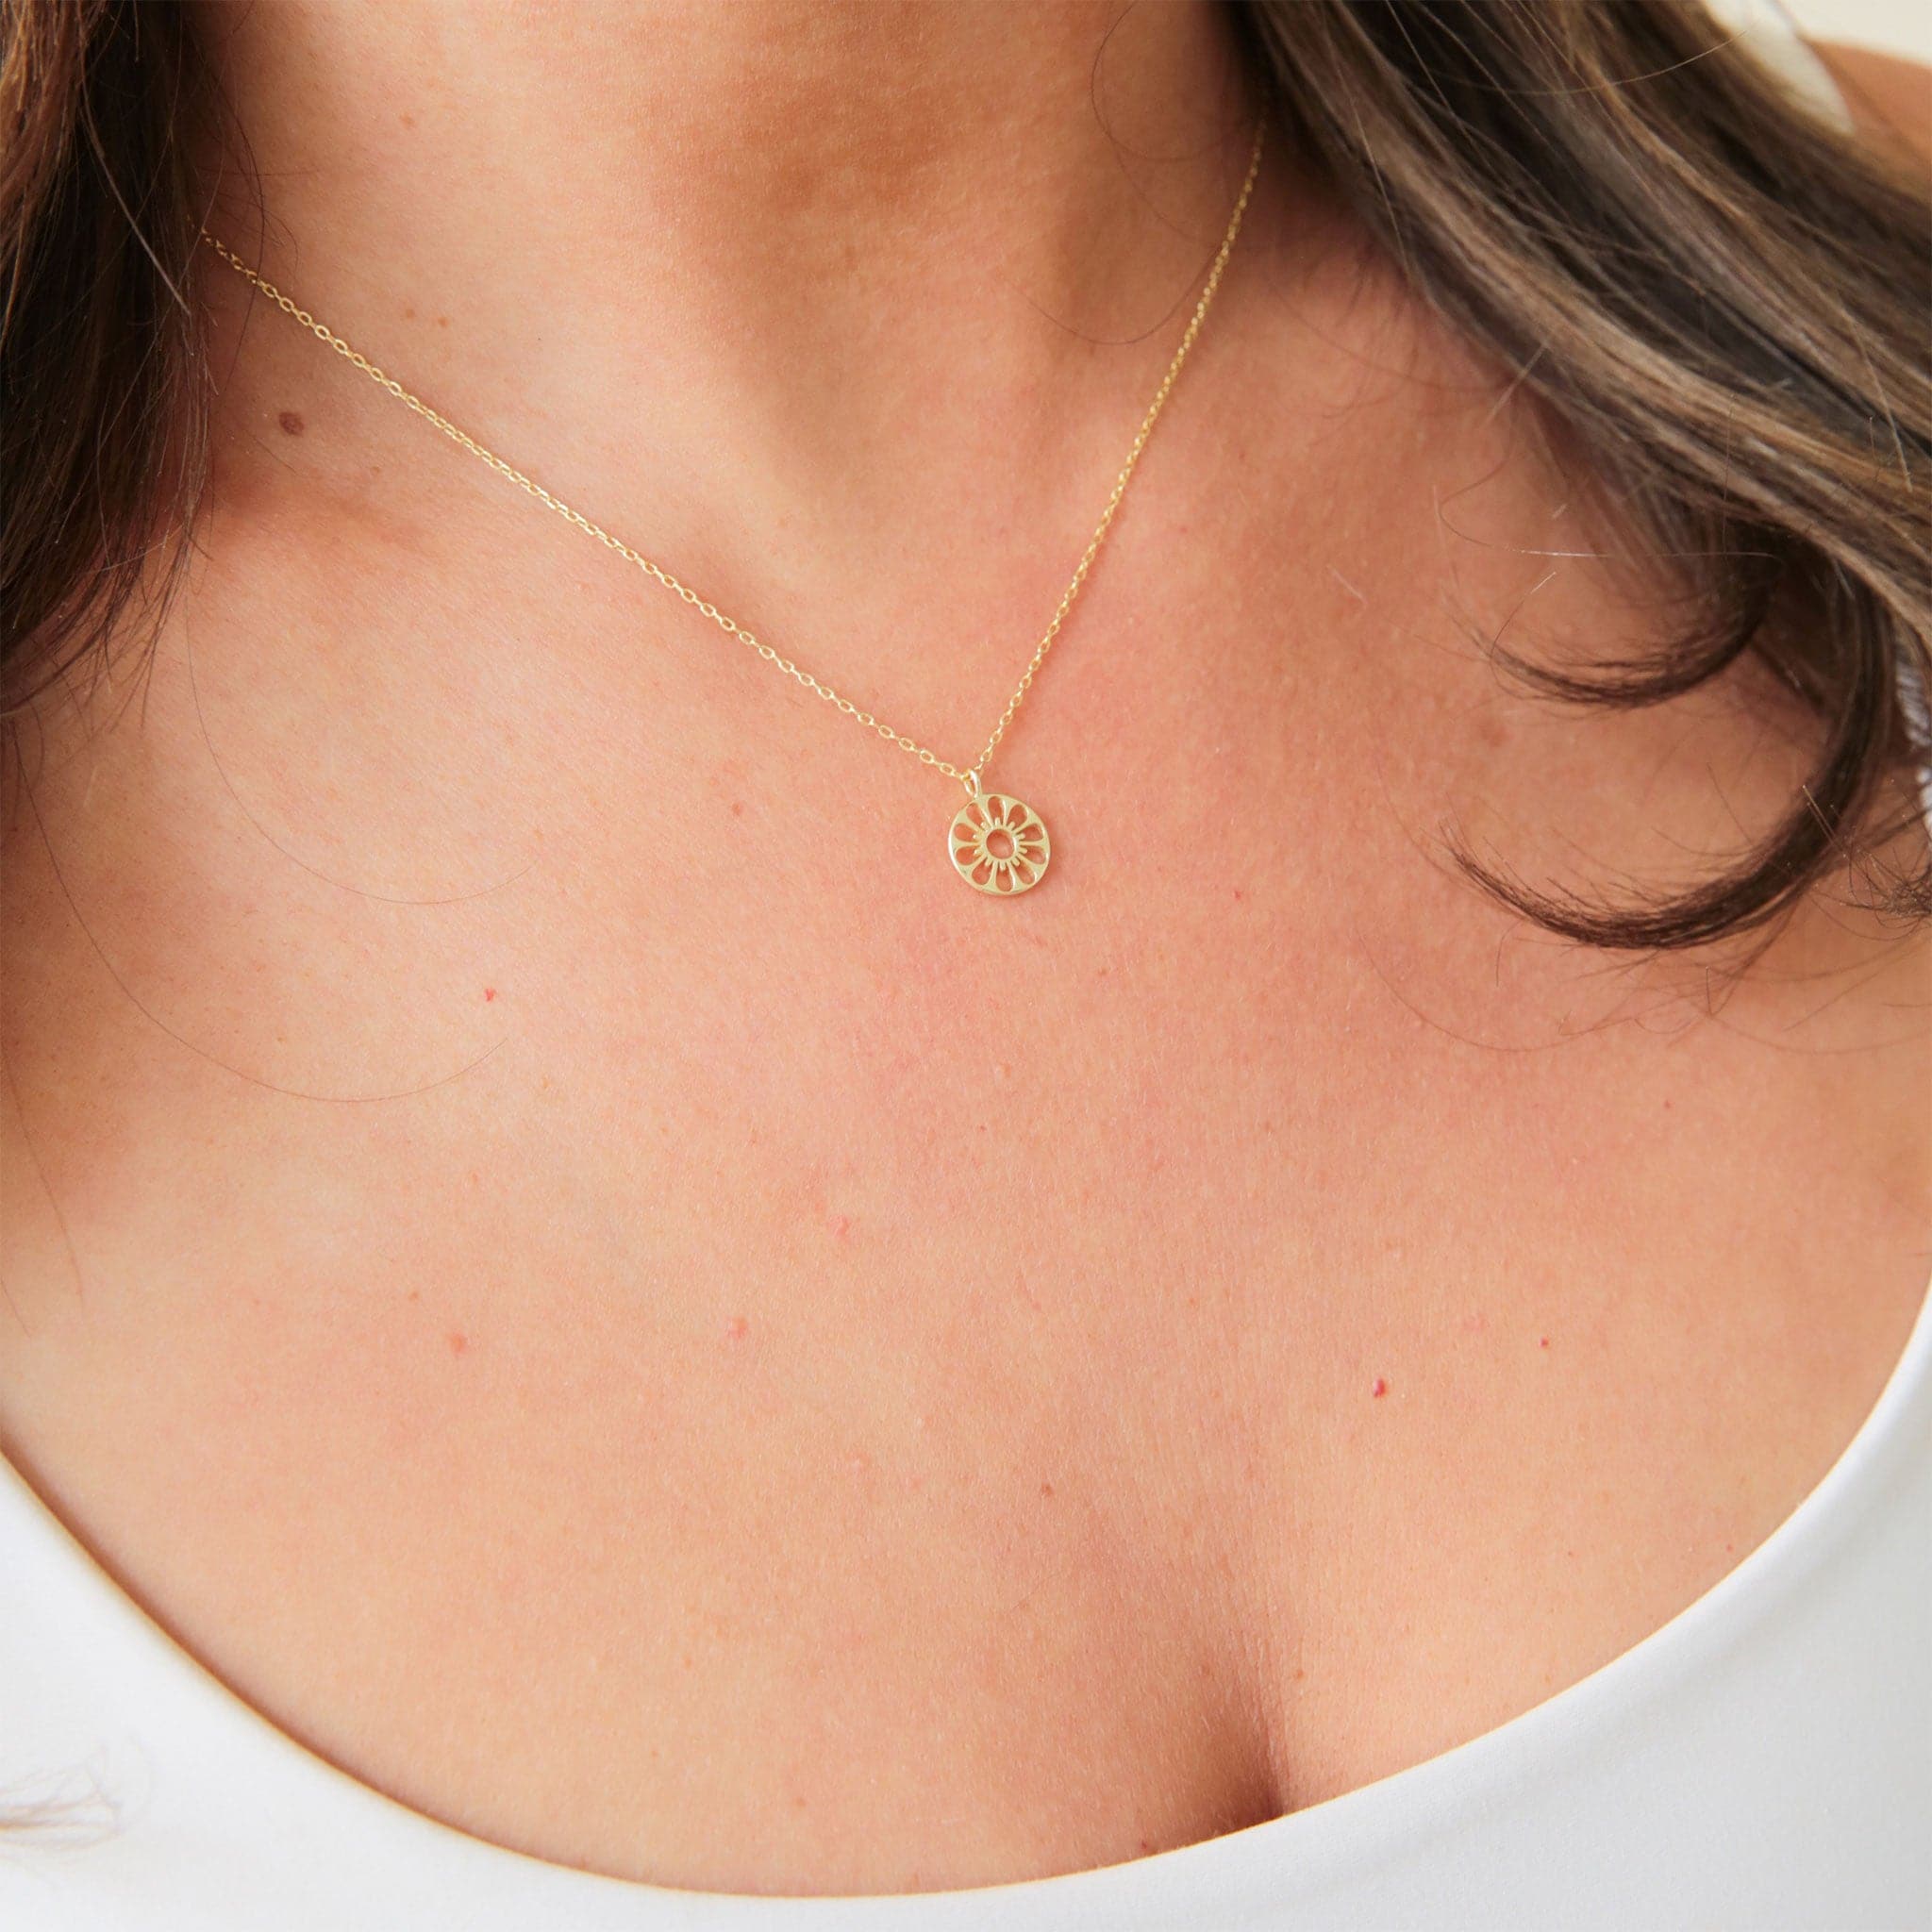 A dainty gold chain necklace with a gold circle pendant in the center with a cut out of a daisy flower, photographed being worn on a model.